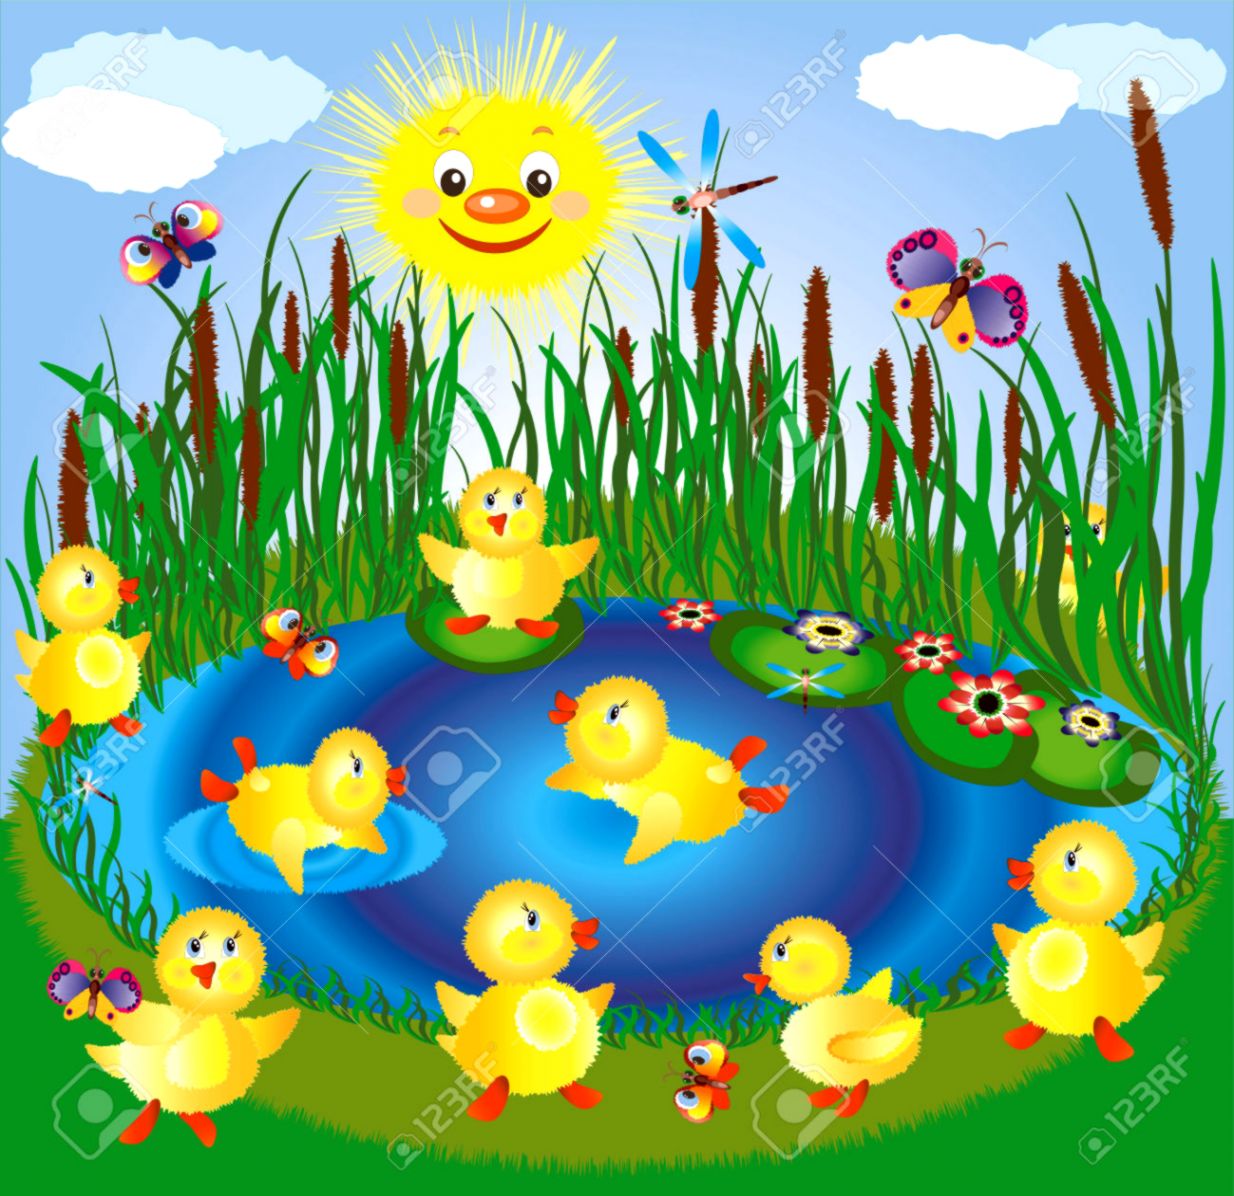 Clipart lake duck pond. Wallpapers savage 